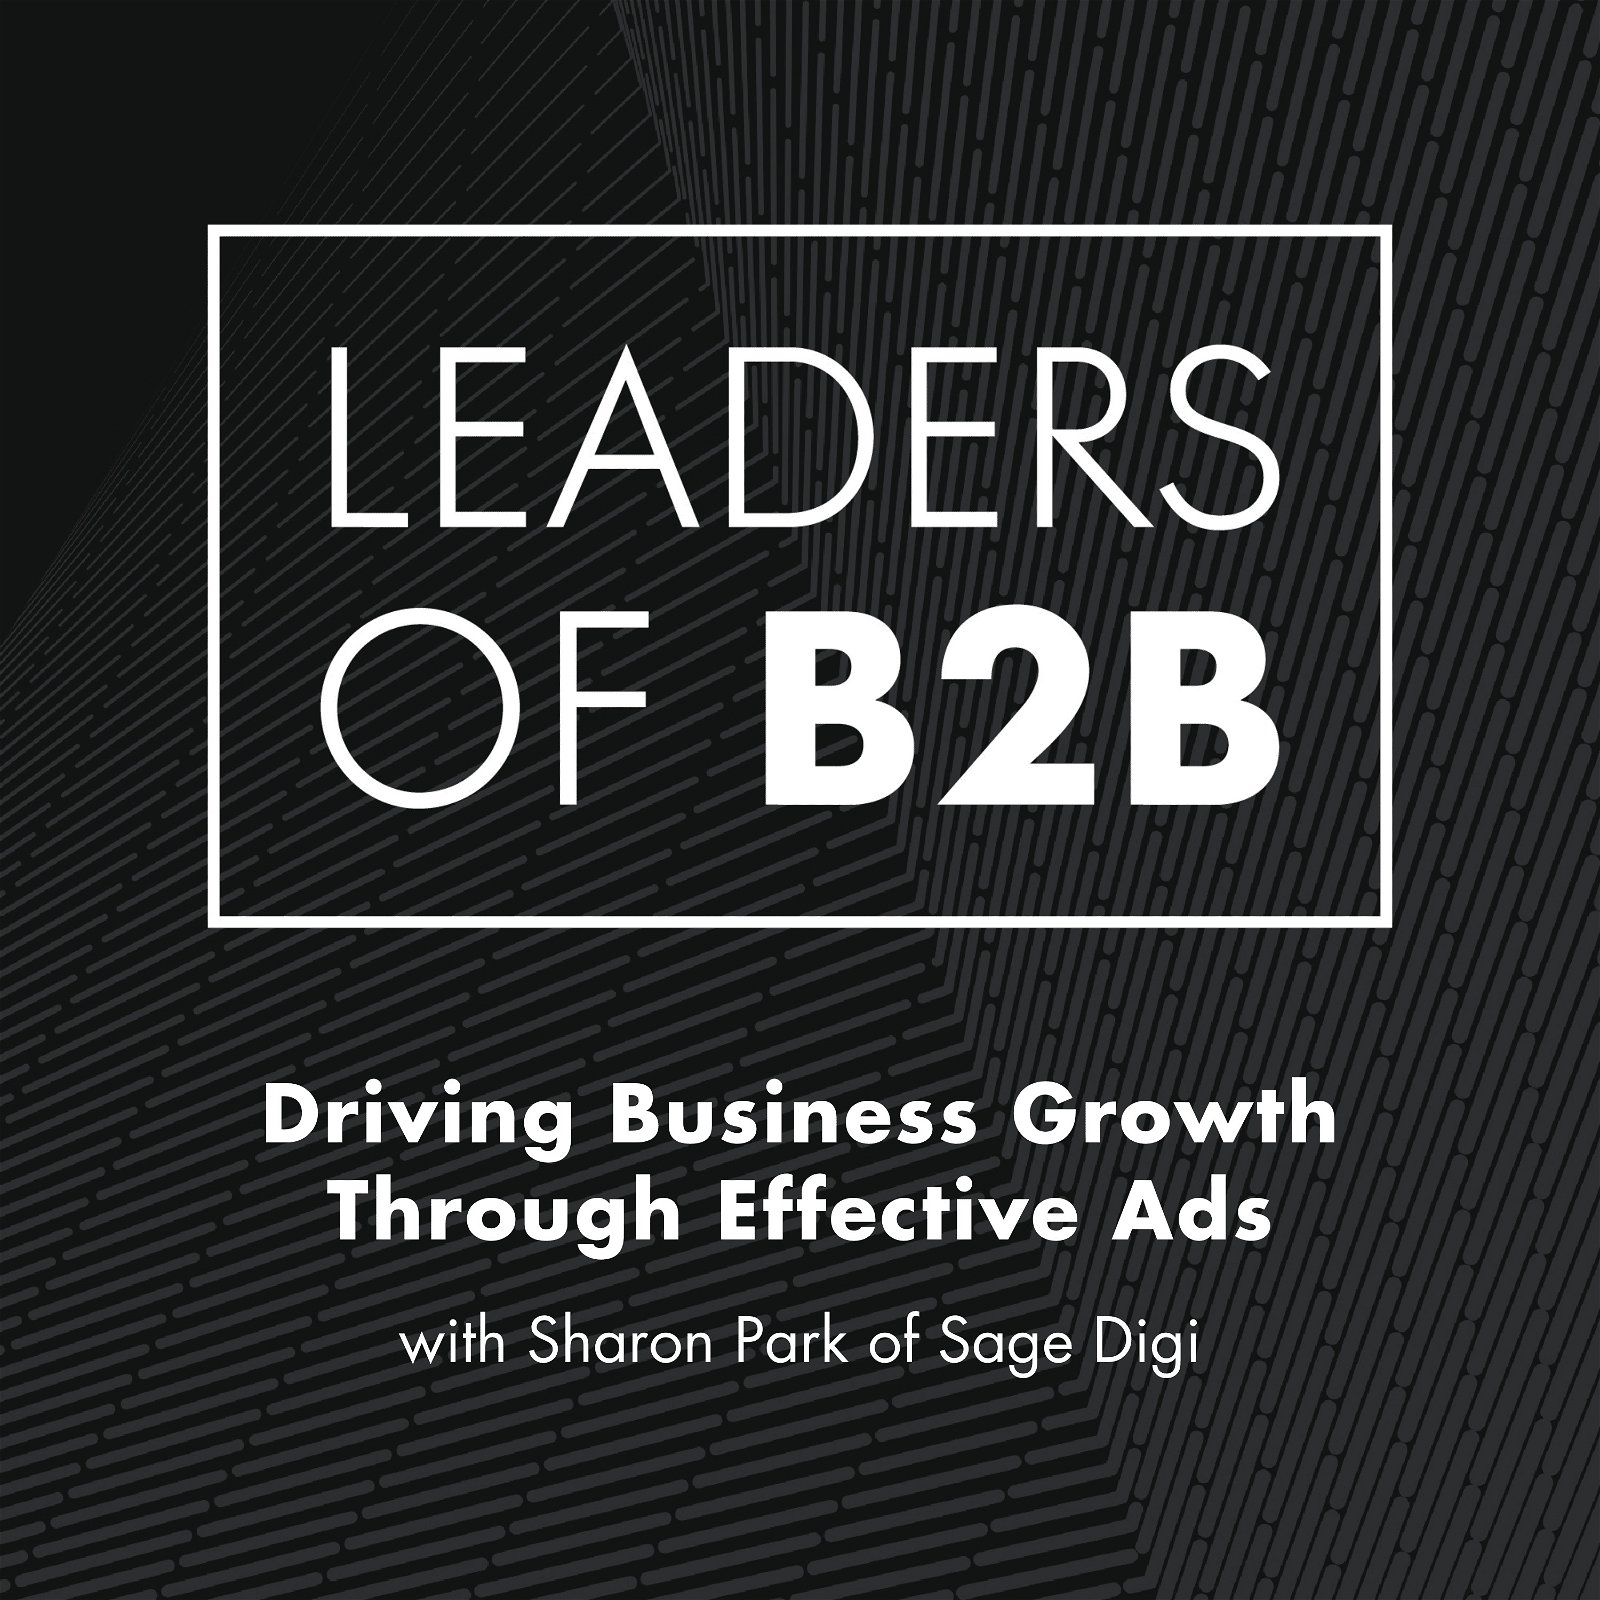 Driving Business Growth Through Effective Ads with Sharon Park of Sage Digi